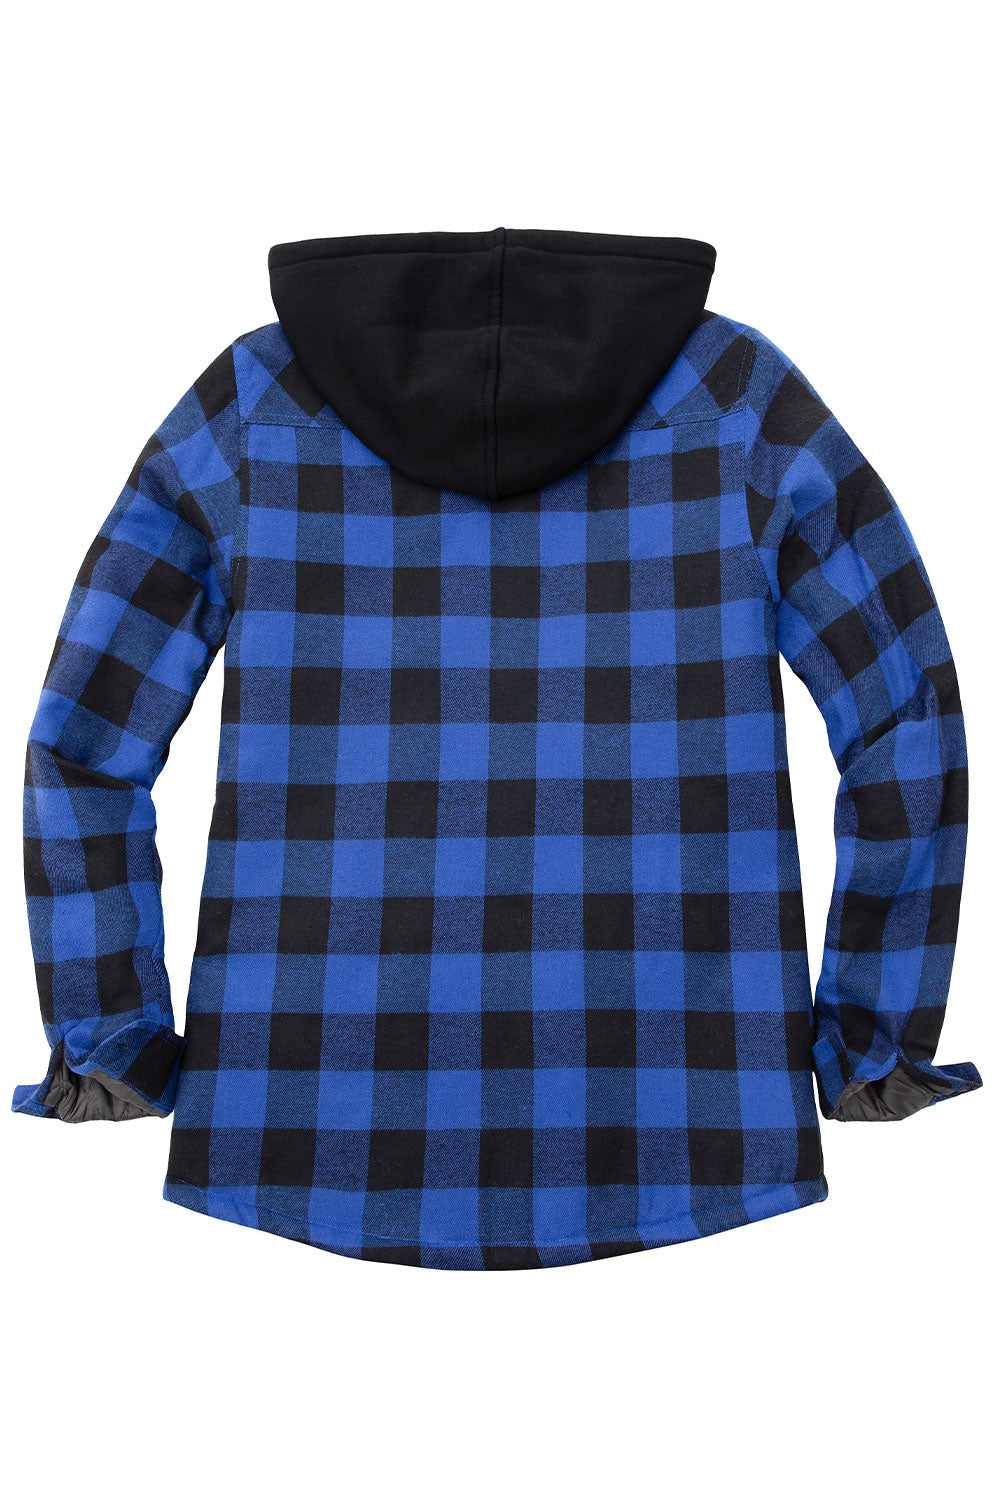 Women's Quilted Lined Hooded Plaid Flannel Shirt Jacket with Hood ...